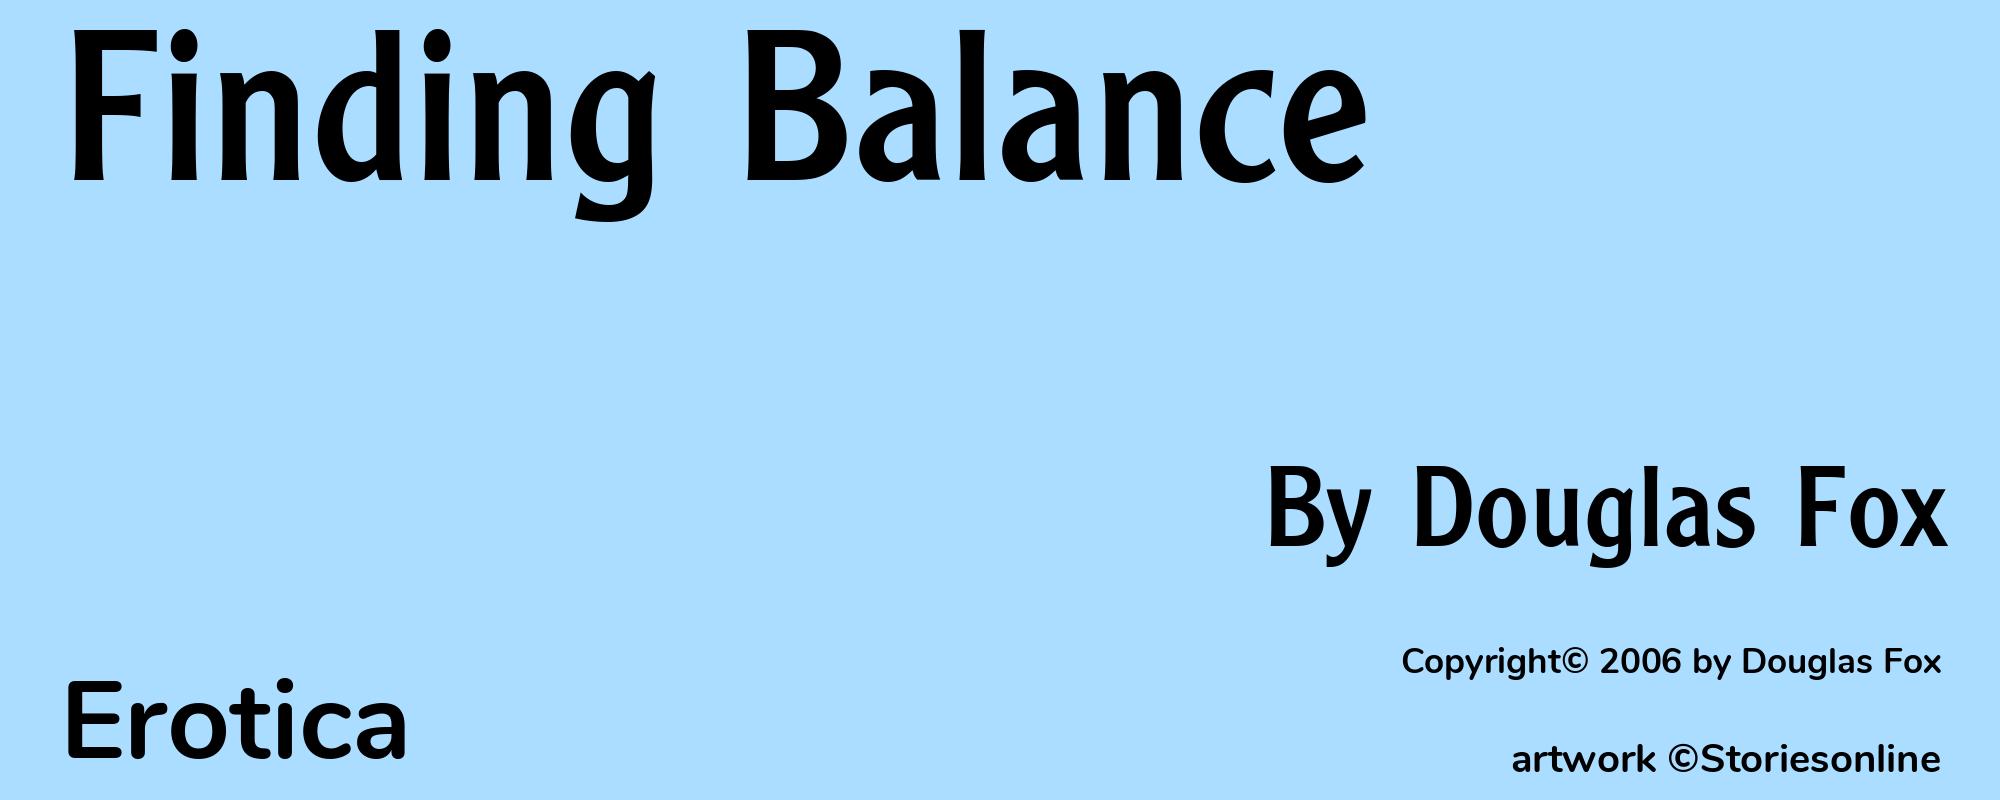 Finding Balance - Cover